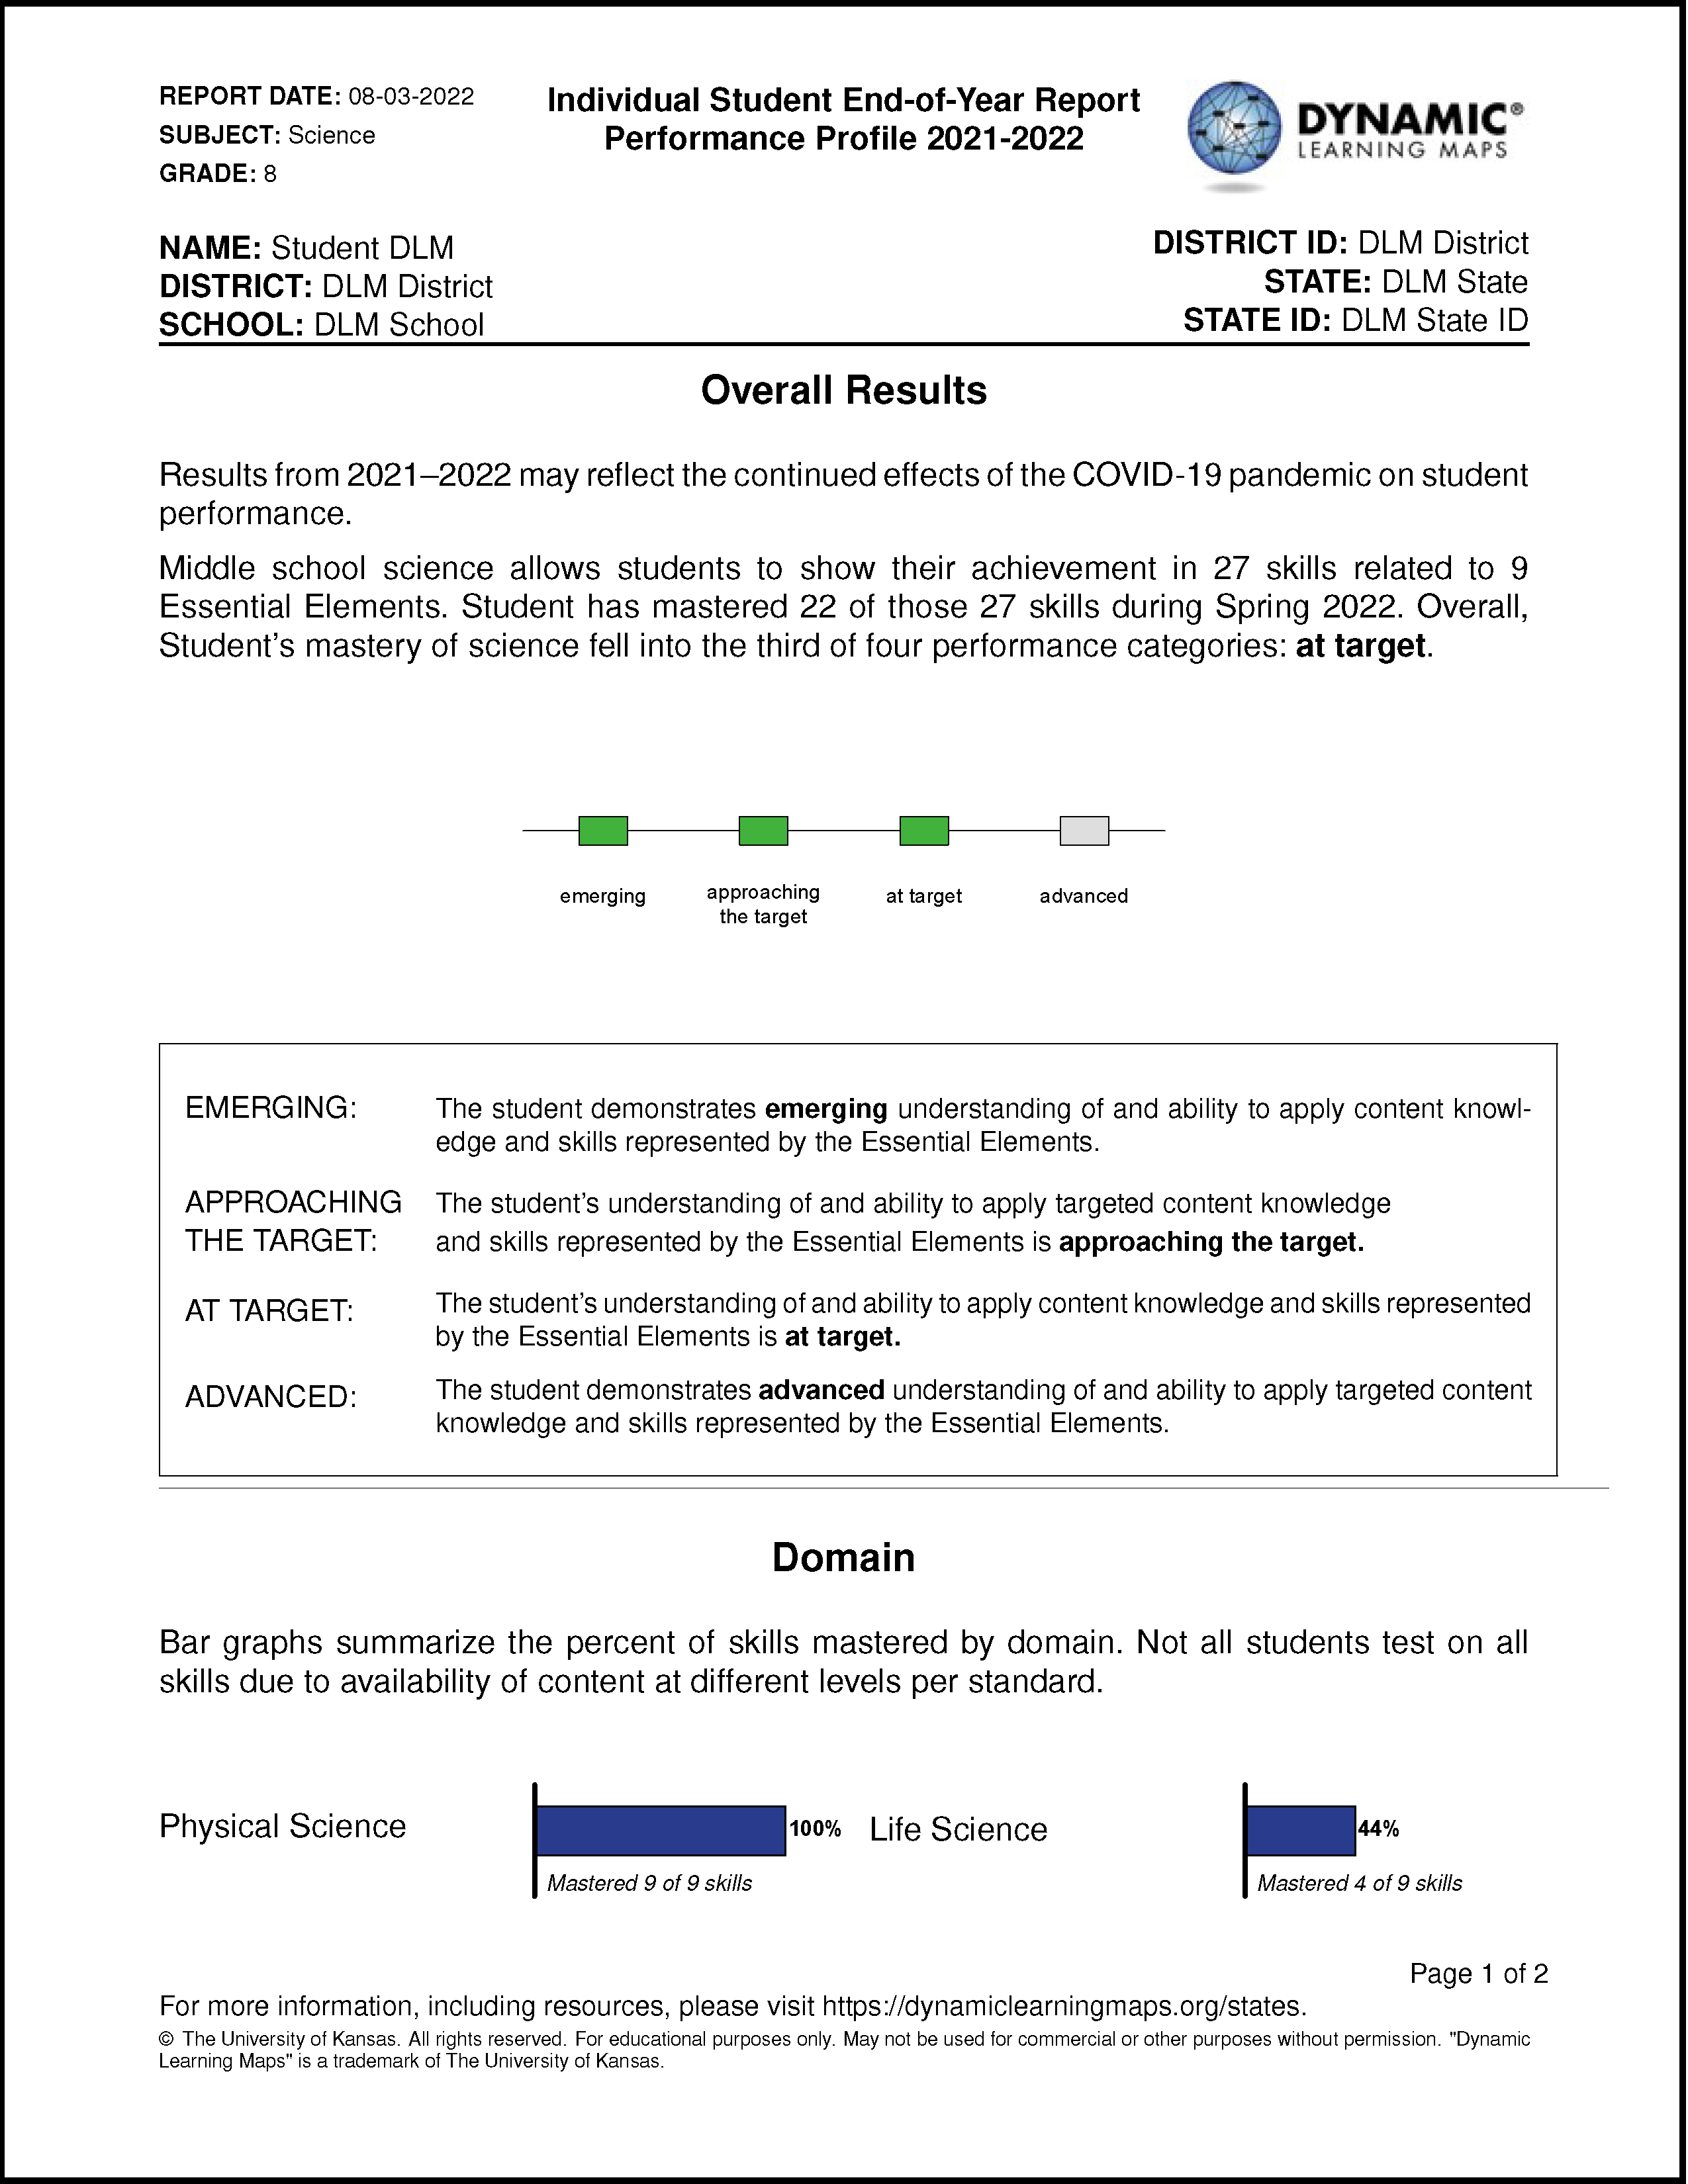 First page of a Science performance profile for a de-identified grade 8 student who mastered 22 skills. The performance profile displays the number of skills mastered per domain. The sample report also features cautionary text that states that results may reflect the continued effects of the COVID-19 pandemic on student performance.